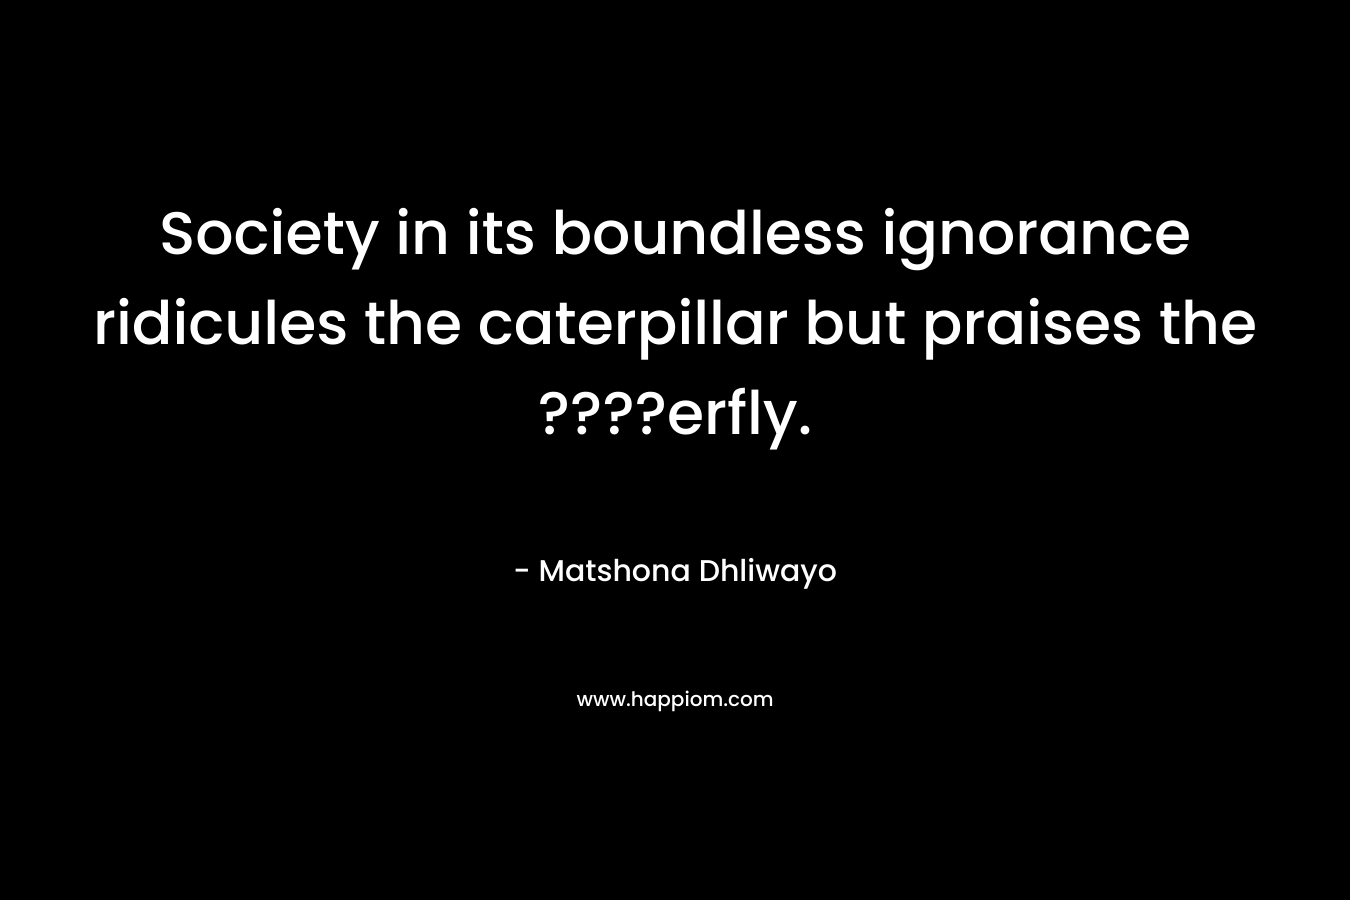 Society in its boundless ignorance ridicules the caterpillar but praises the ????erfly. – Matshona Dhliwayo